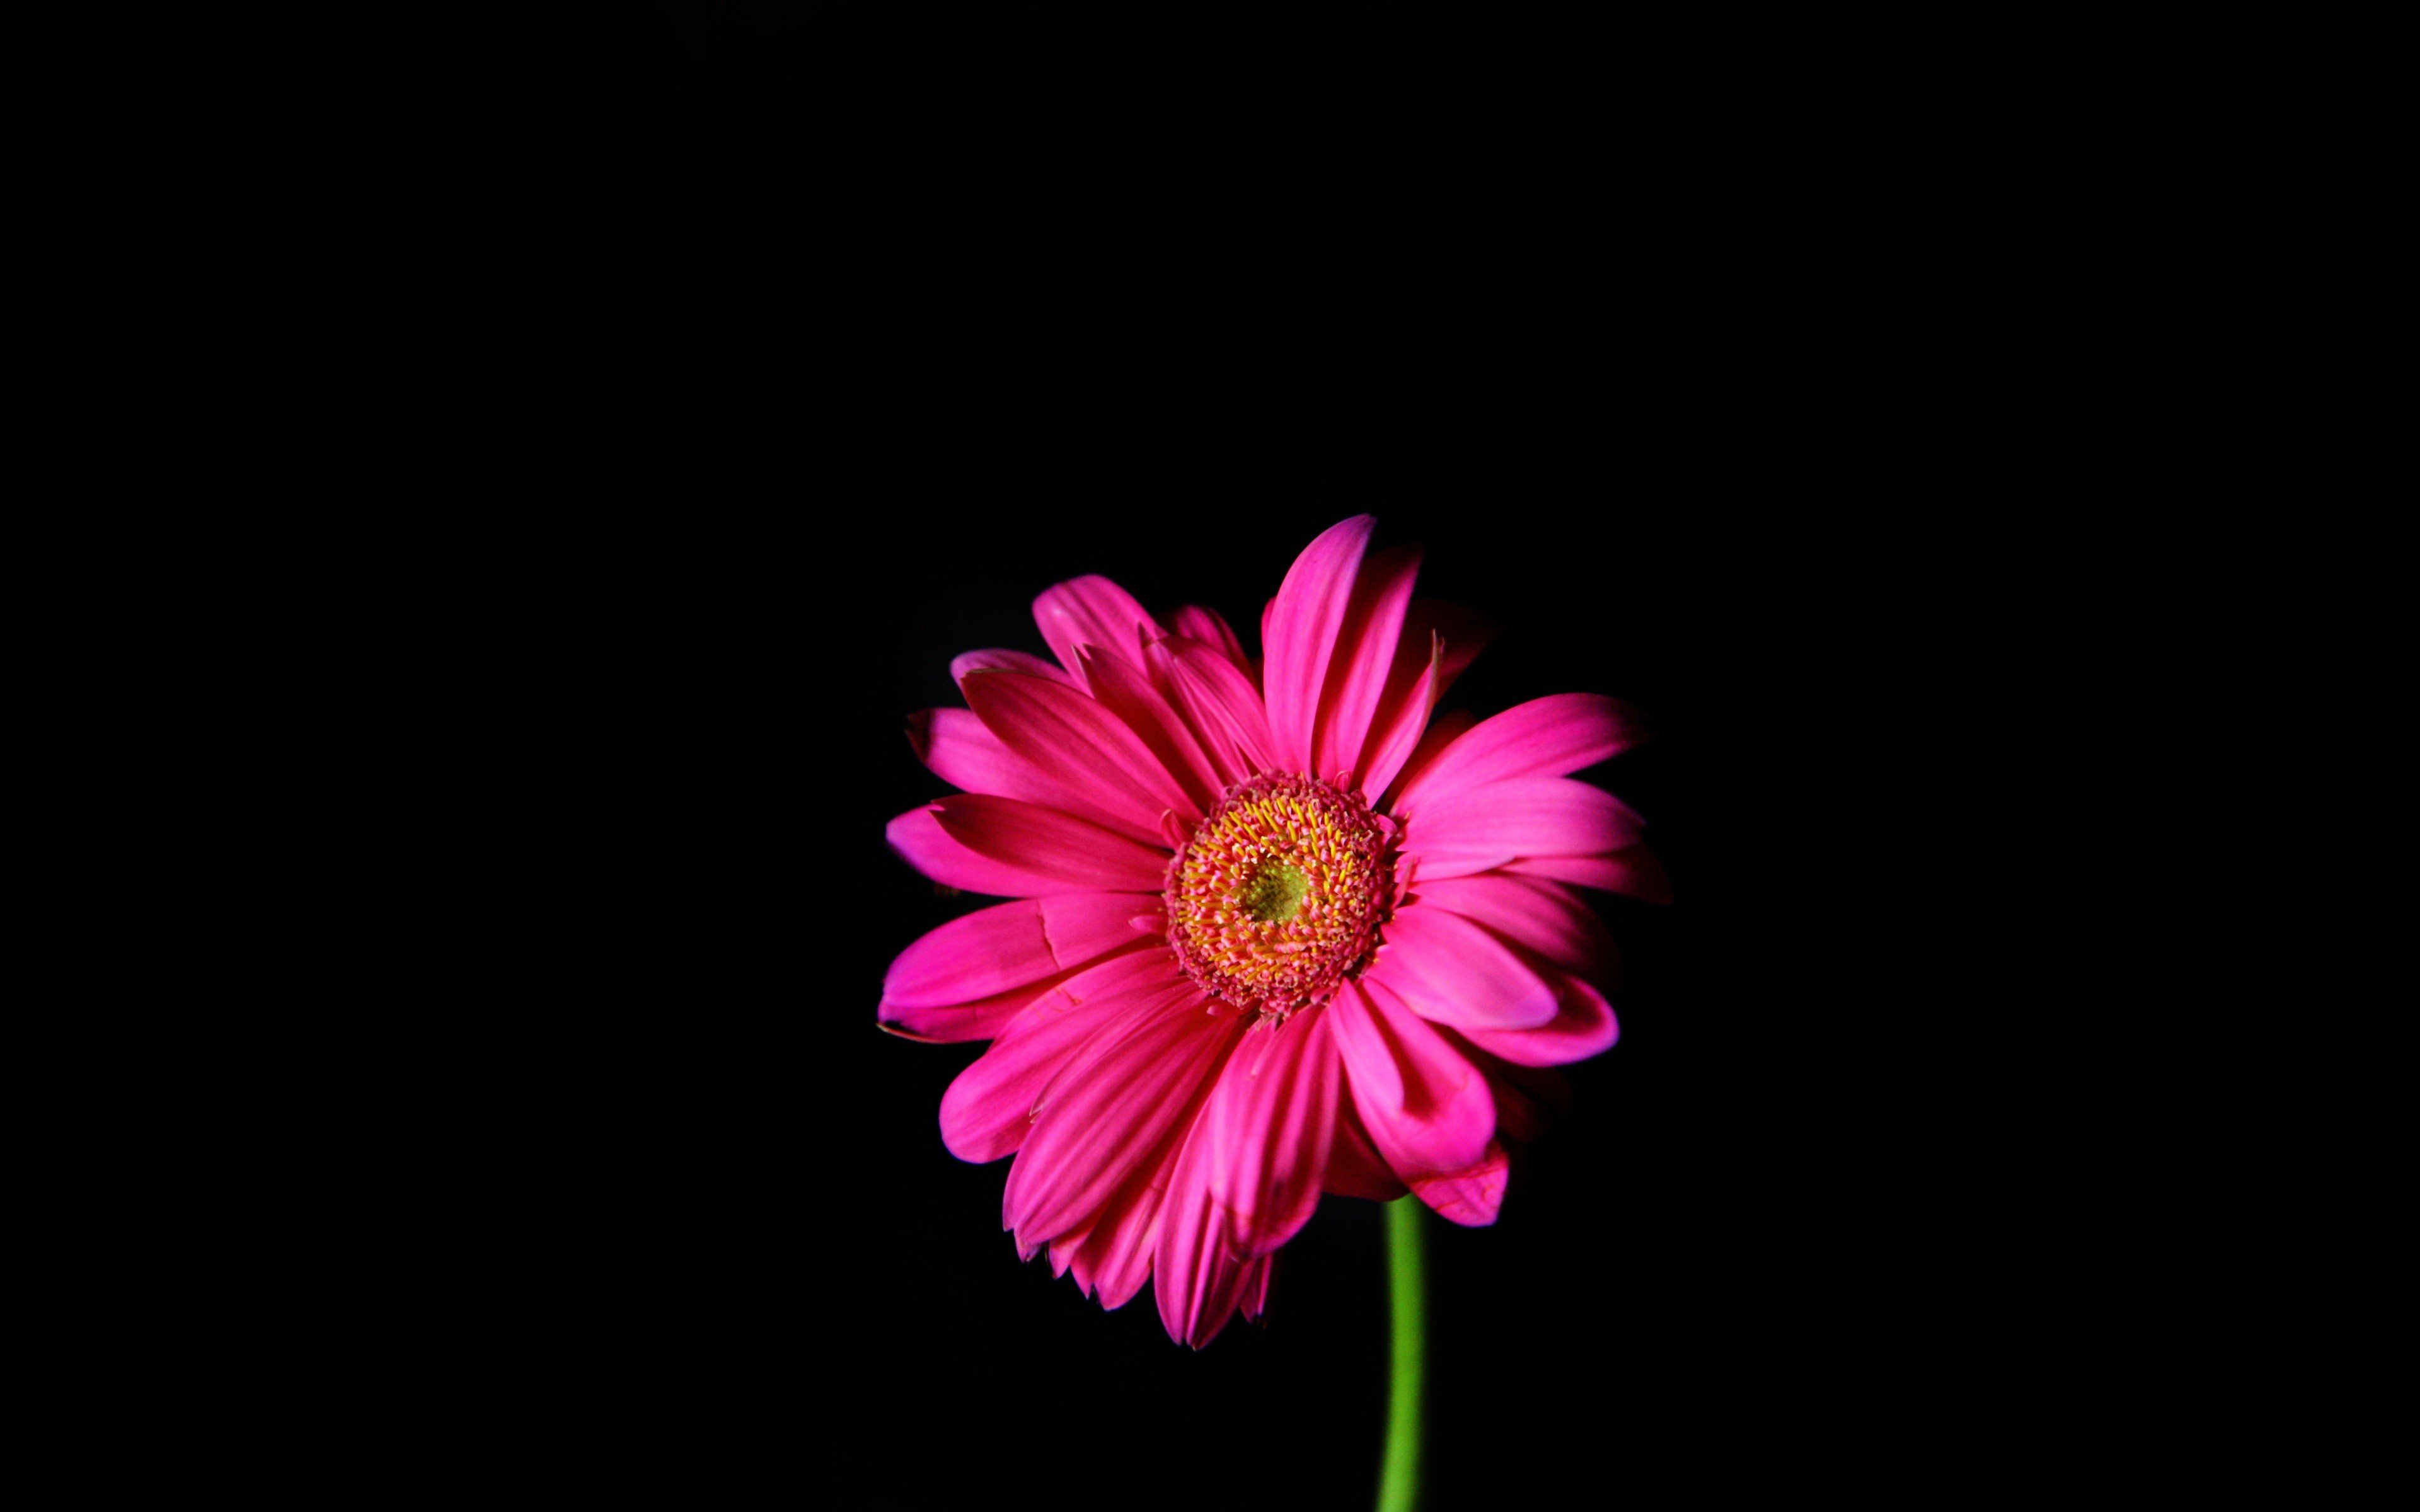 flowers pink daisy black background wallpaper background